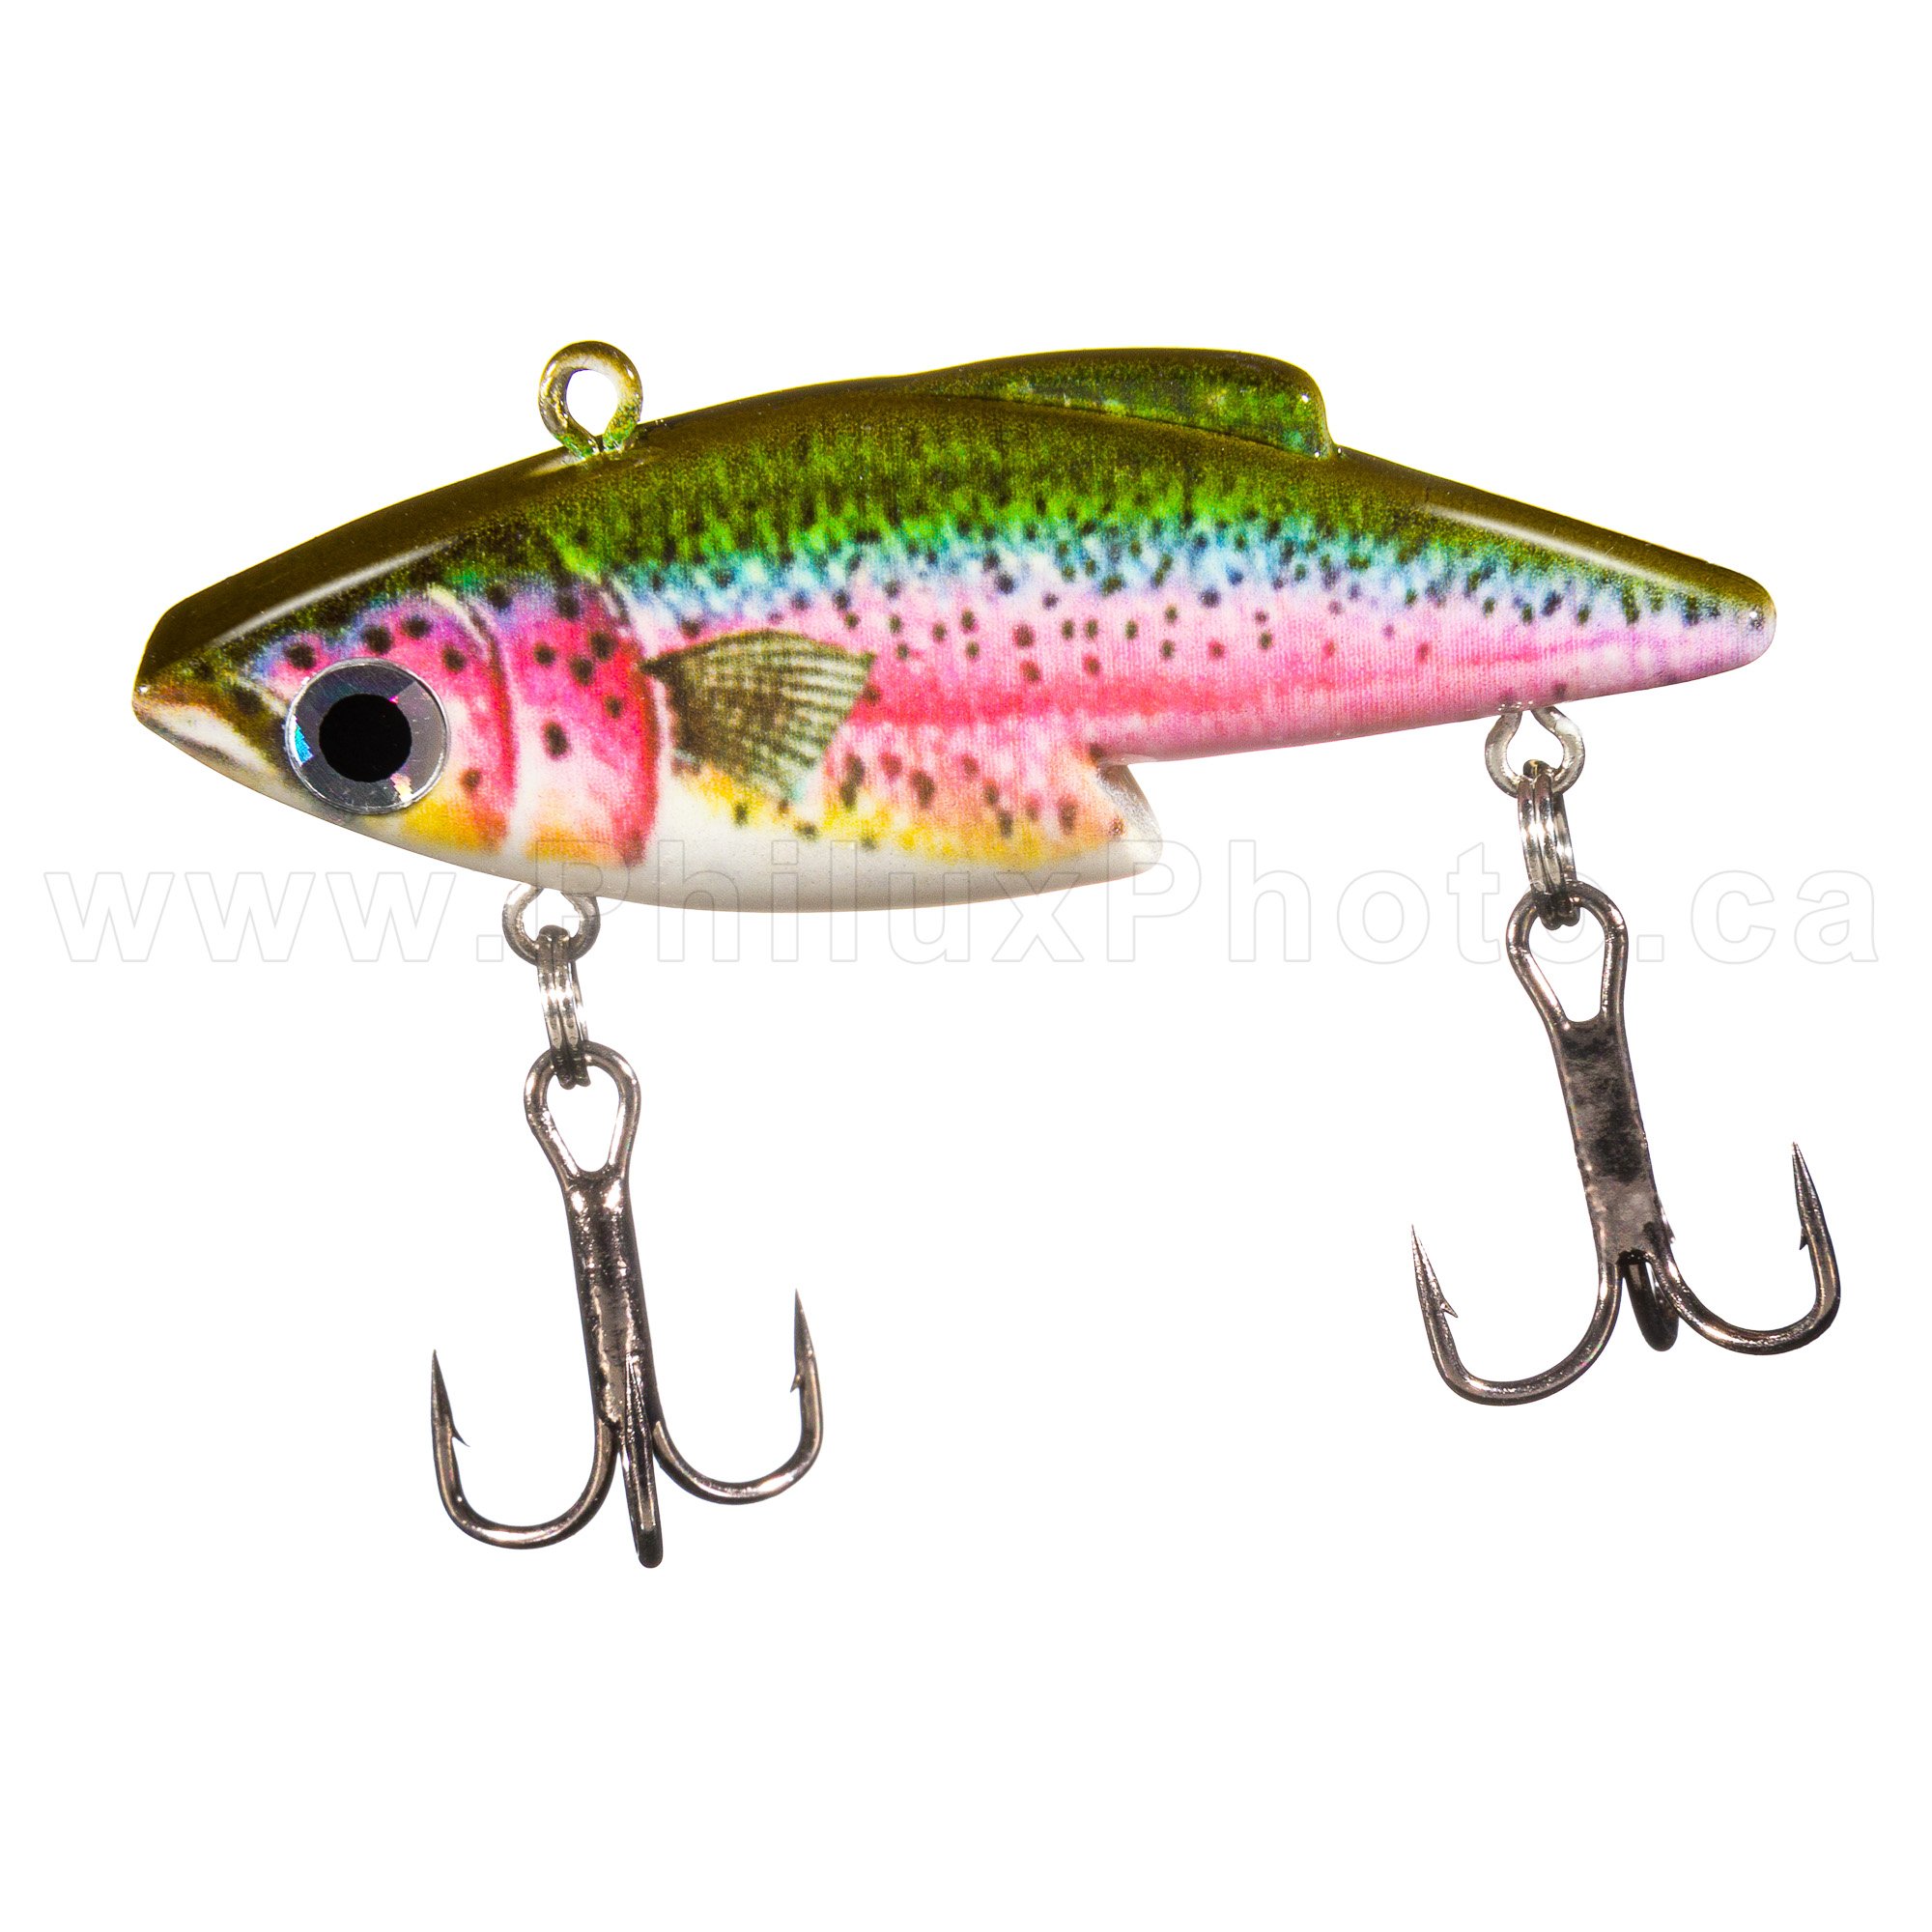 https://philuxphoto.ca/wp-content/uploads/2019/06/fish_lures_philux_photo_product_photography_calgary_vancouver_toronto_9962_v02.jpg